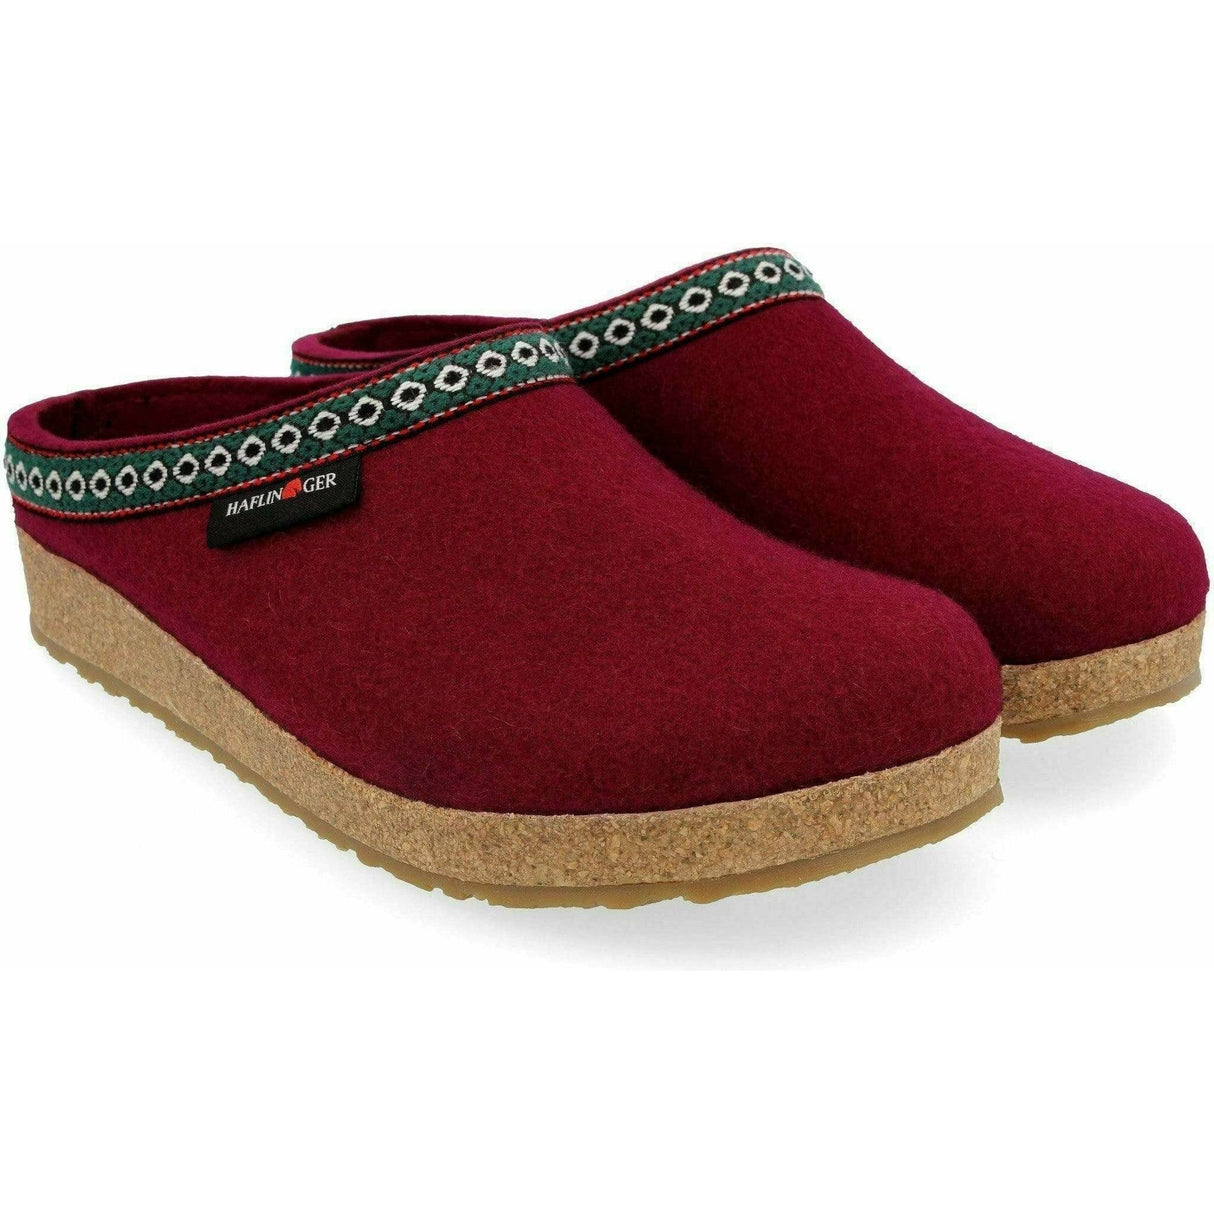 Haflinger GZ Classic Grizzly Wool Clogs  -  36 / Bordo